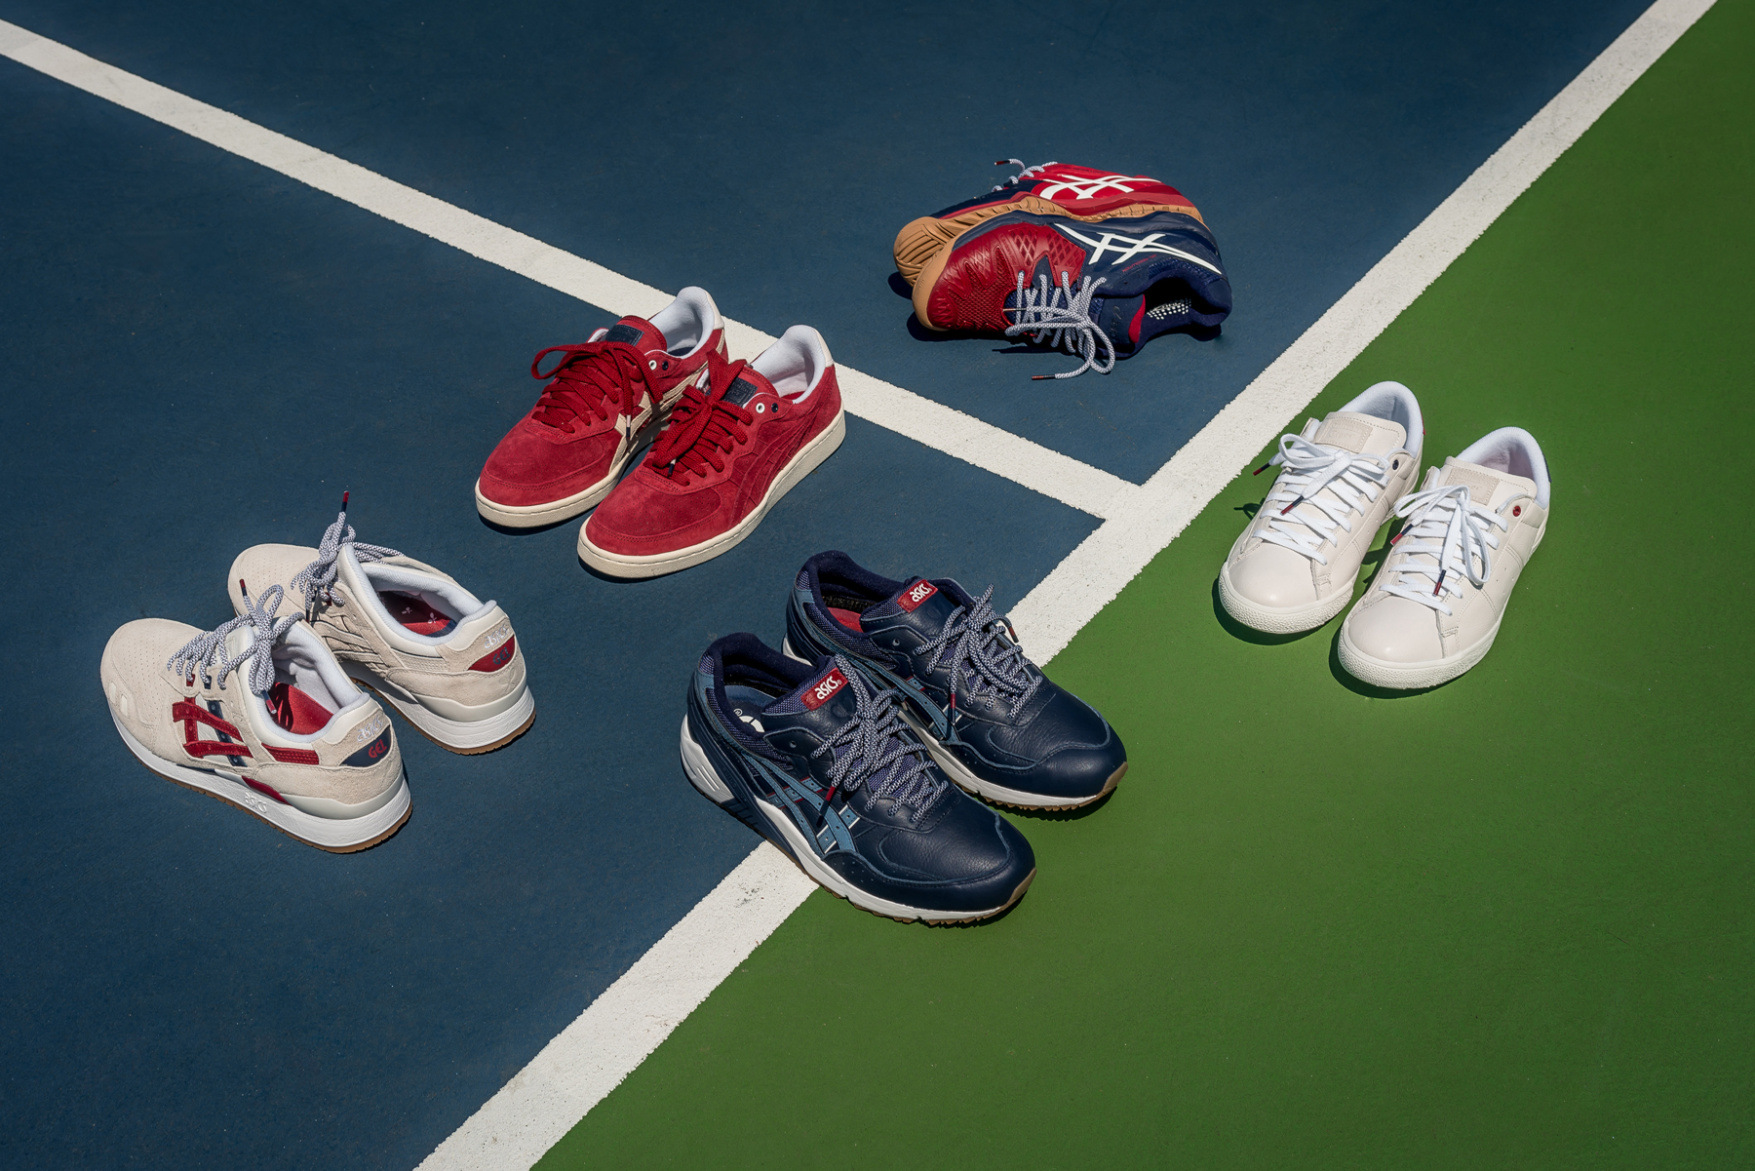 parker-shoes-asics-game-set-match-tennis-sneaker-collection-1